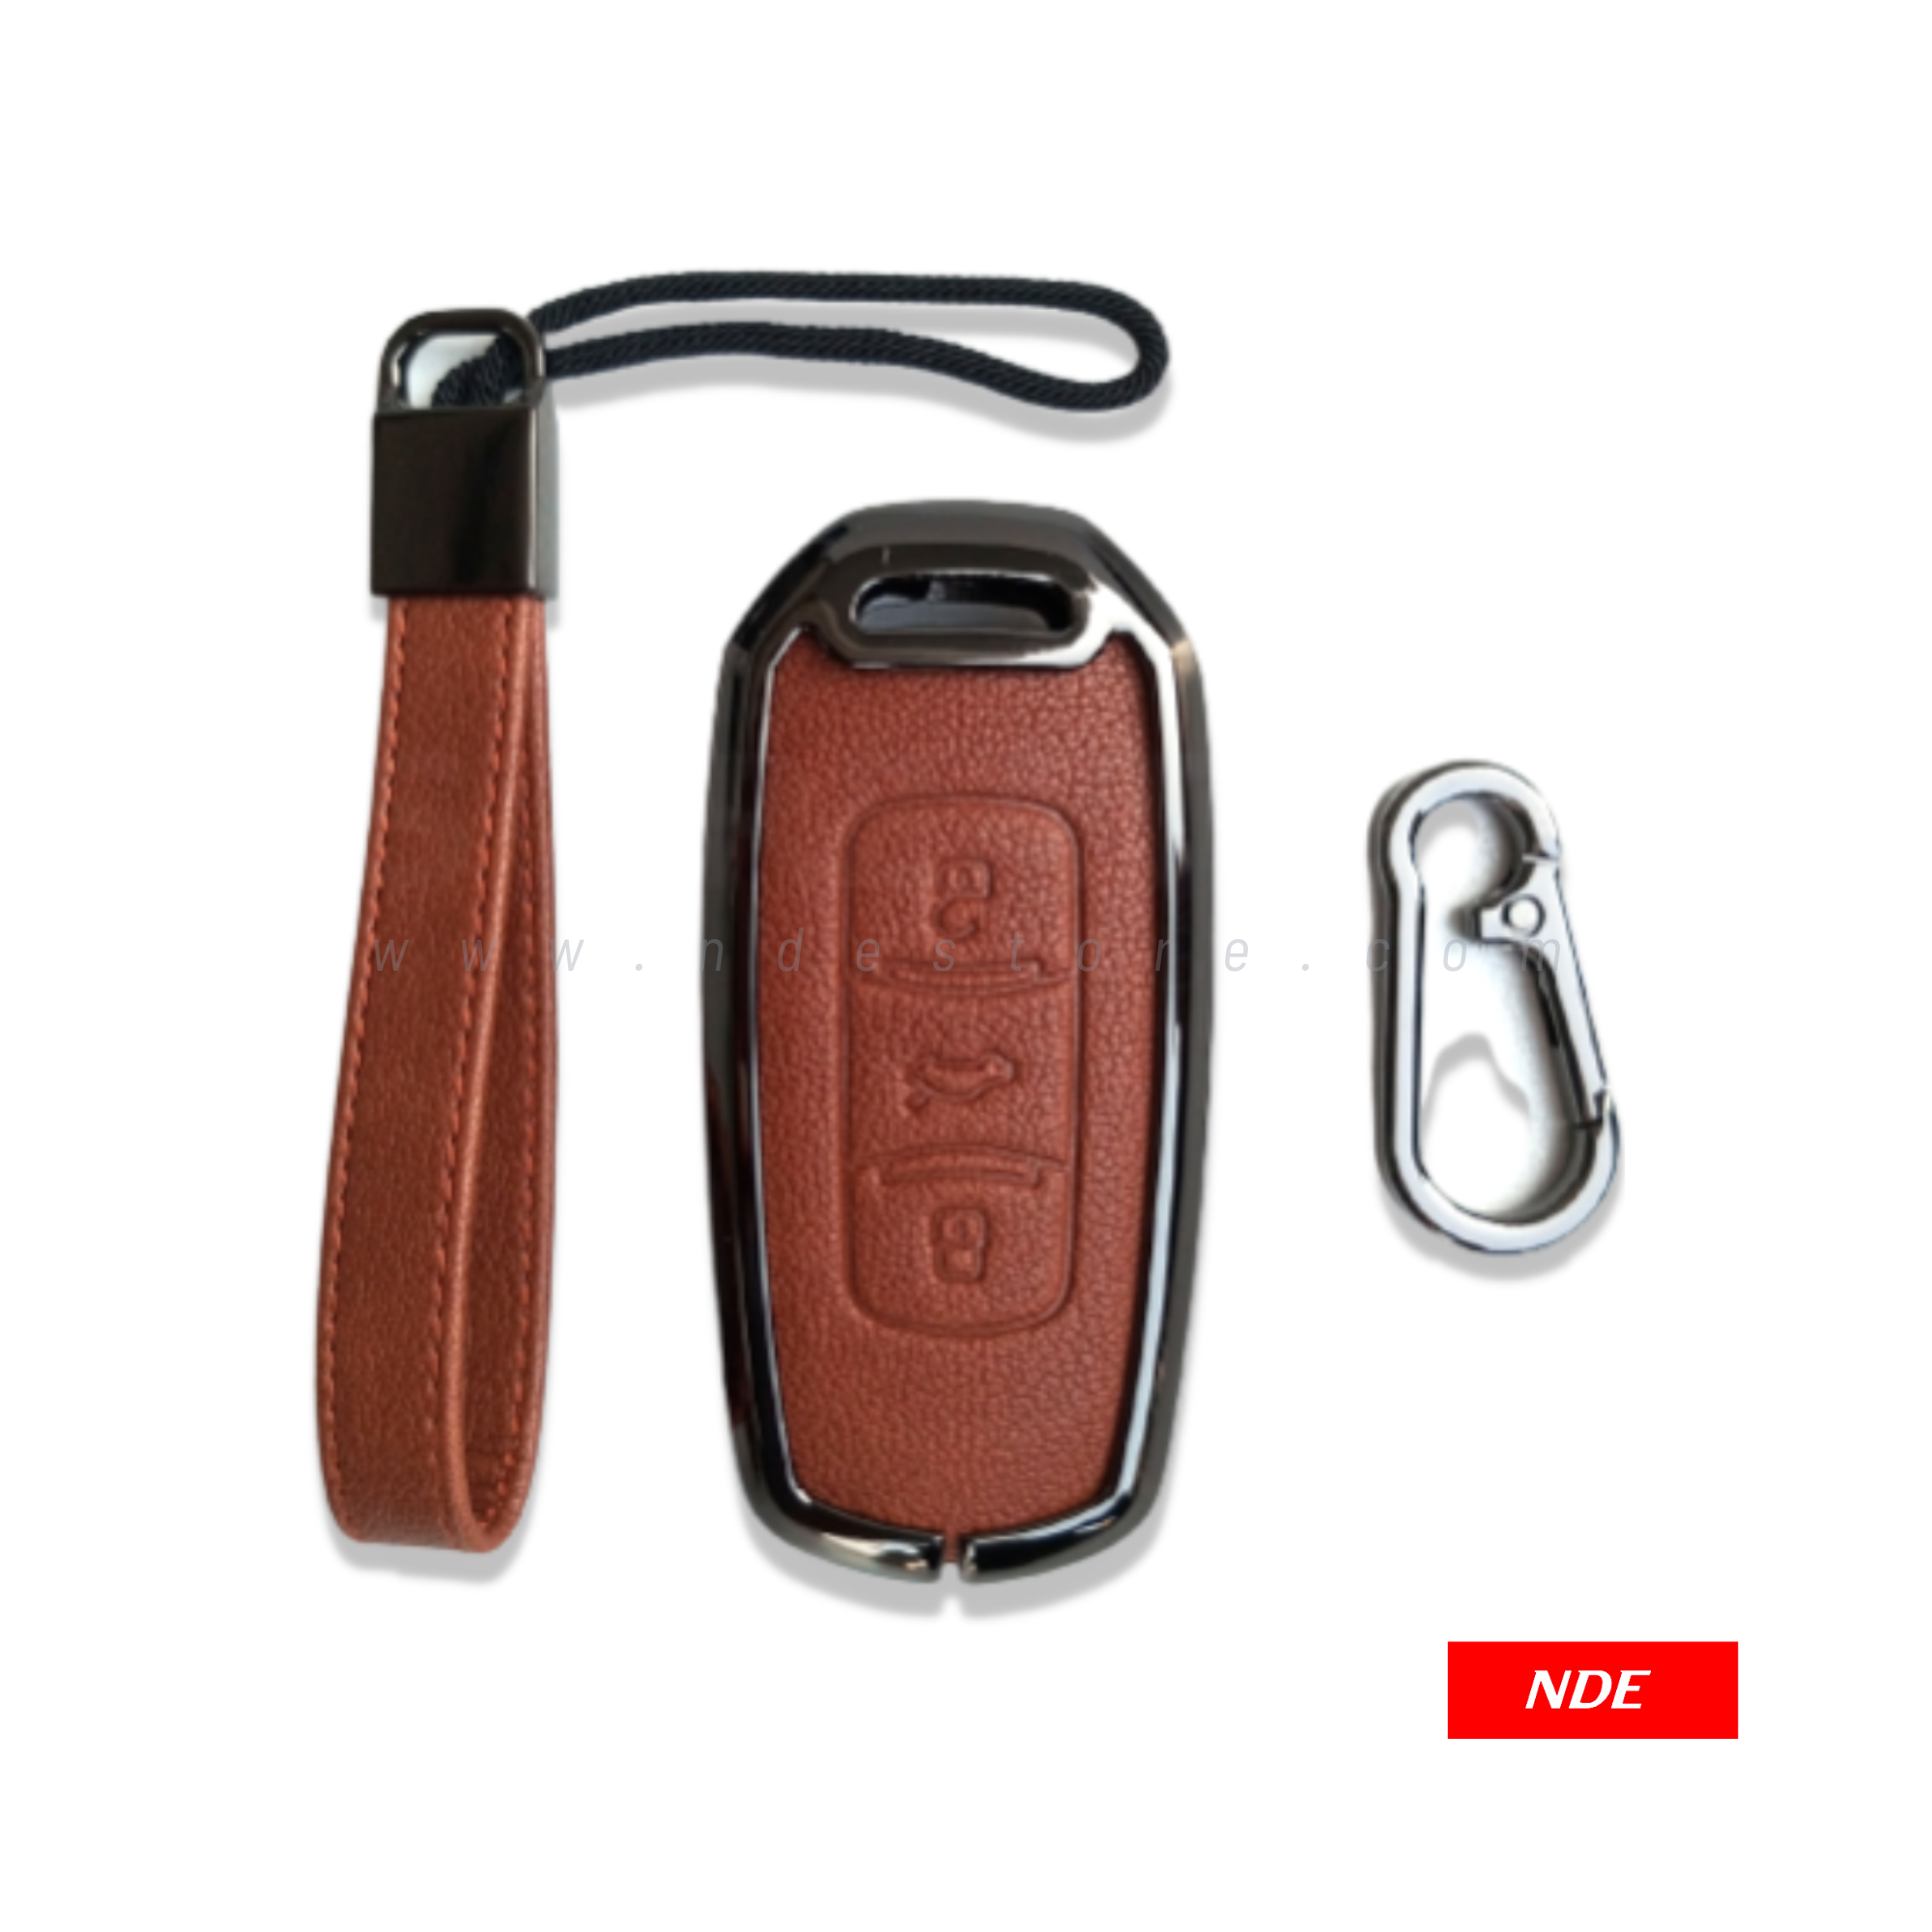 KEY COVER METAL AND LEATHER FOR PROTON X70